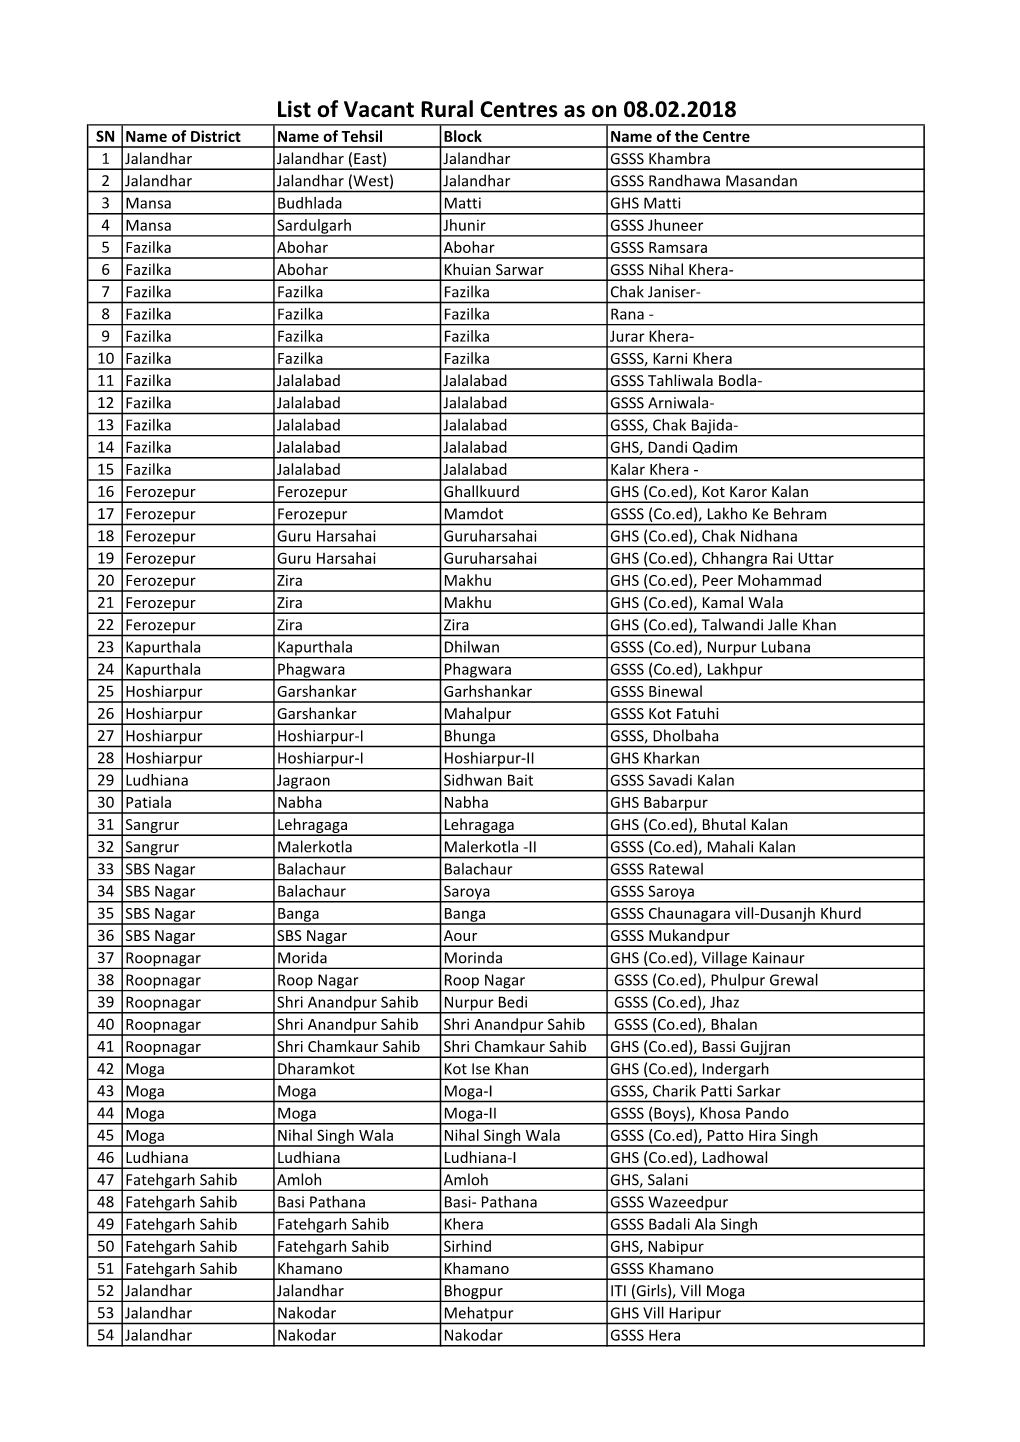 List of Vacant Rural Centres As on 08.02.2018